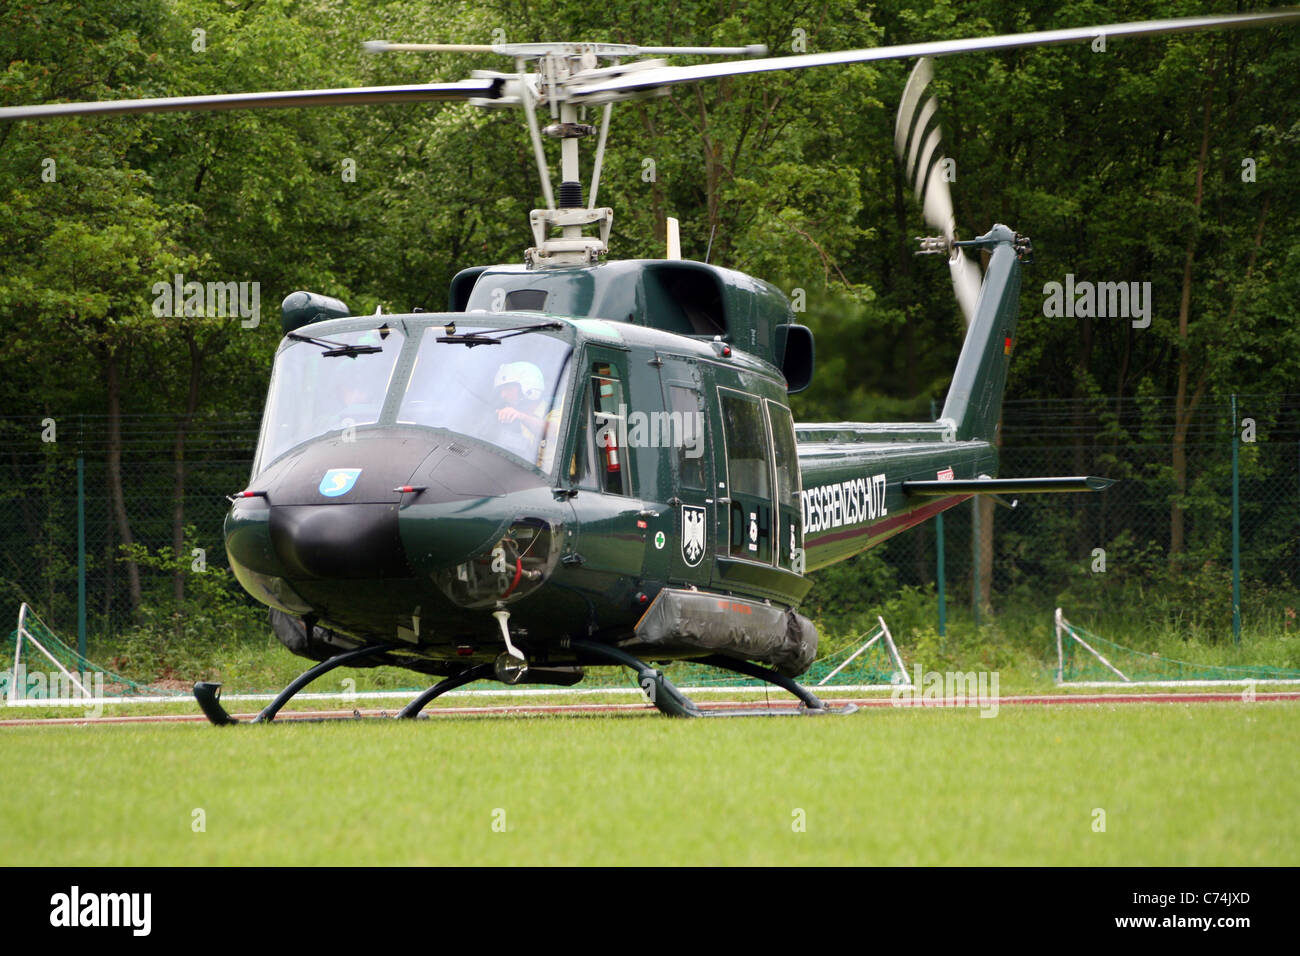 German Bundesgrenzschutz (Border guard) helicopter about to take off from Bonn-Hangelar airport, Germany. Stock Photo